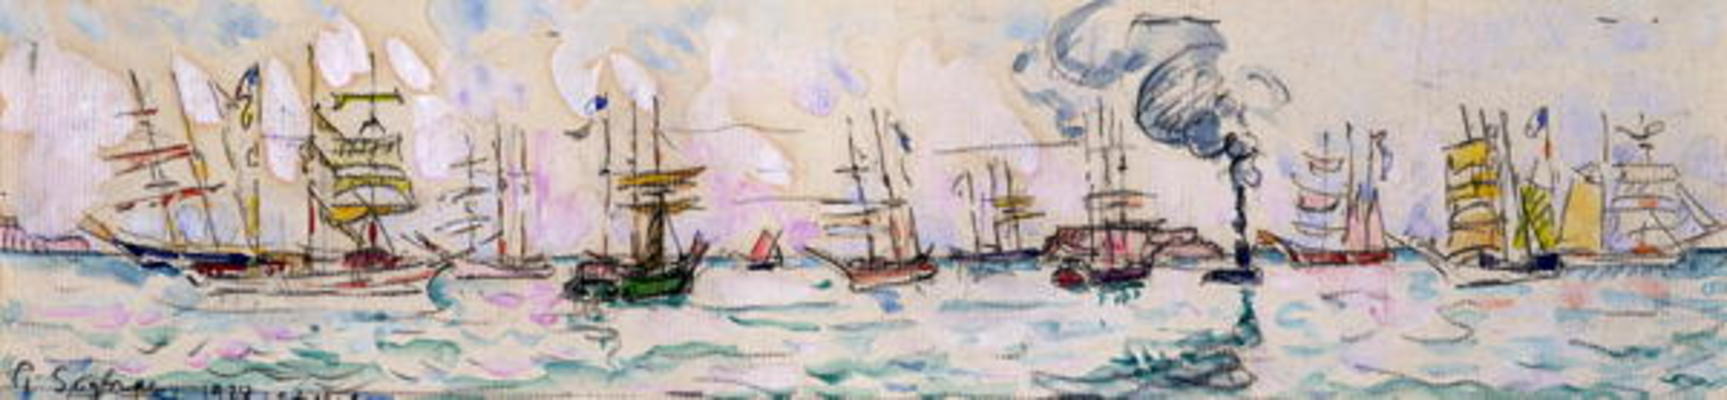 The Departure of the Fishing Trawlers to Newfoundland, 1928 (w/c on paper) von Paul Signac